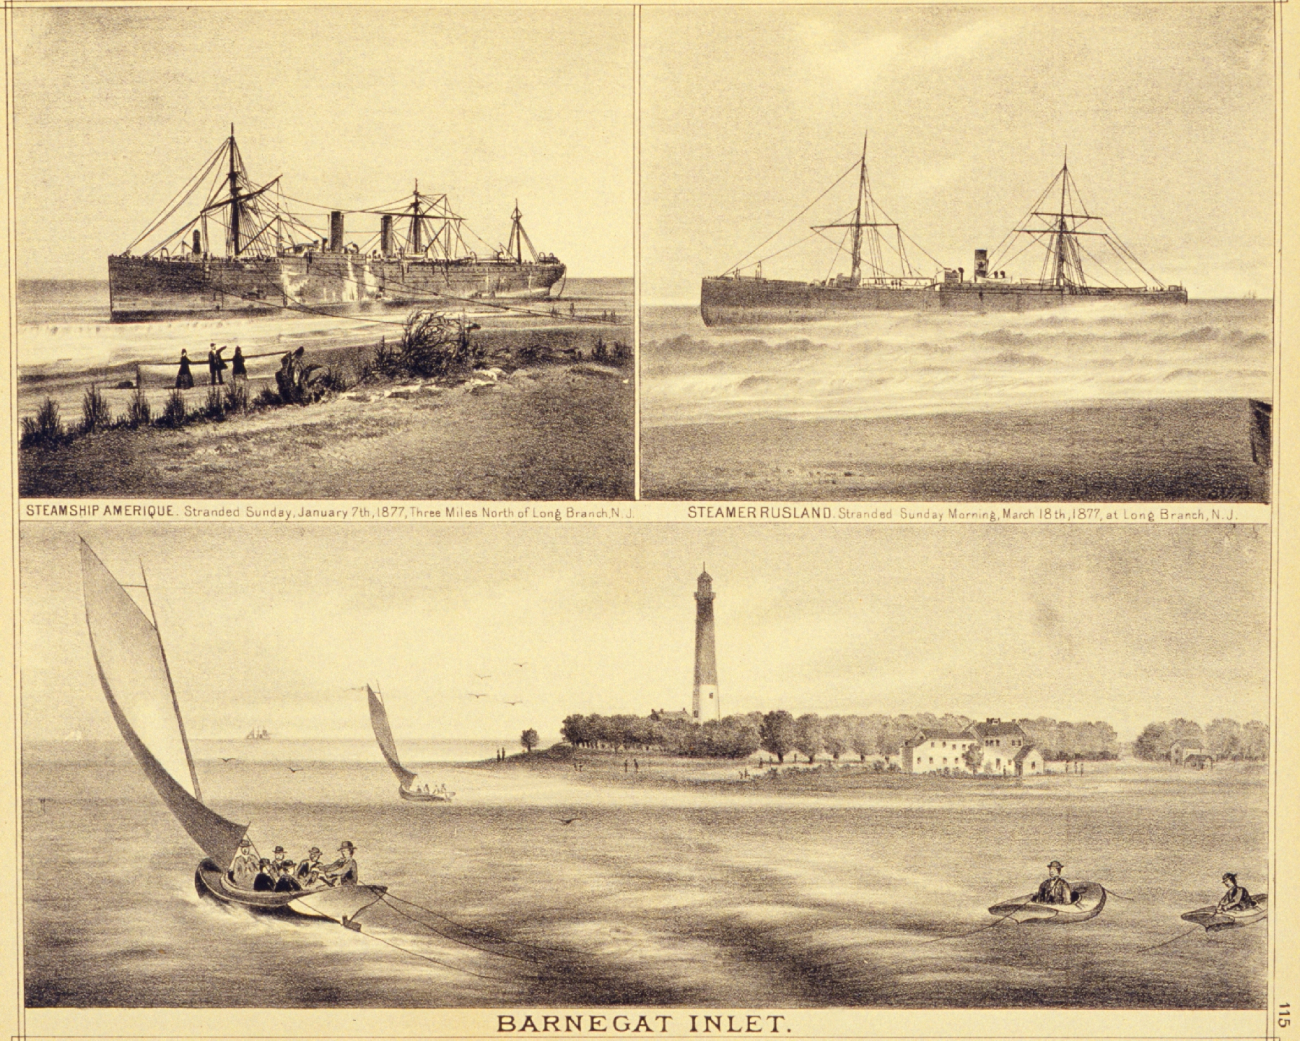 Top:  Two steamers stranded at Long Branch, New Jersey